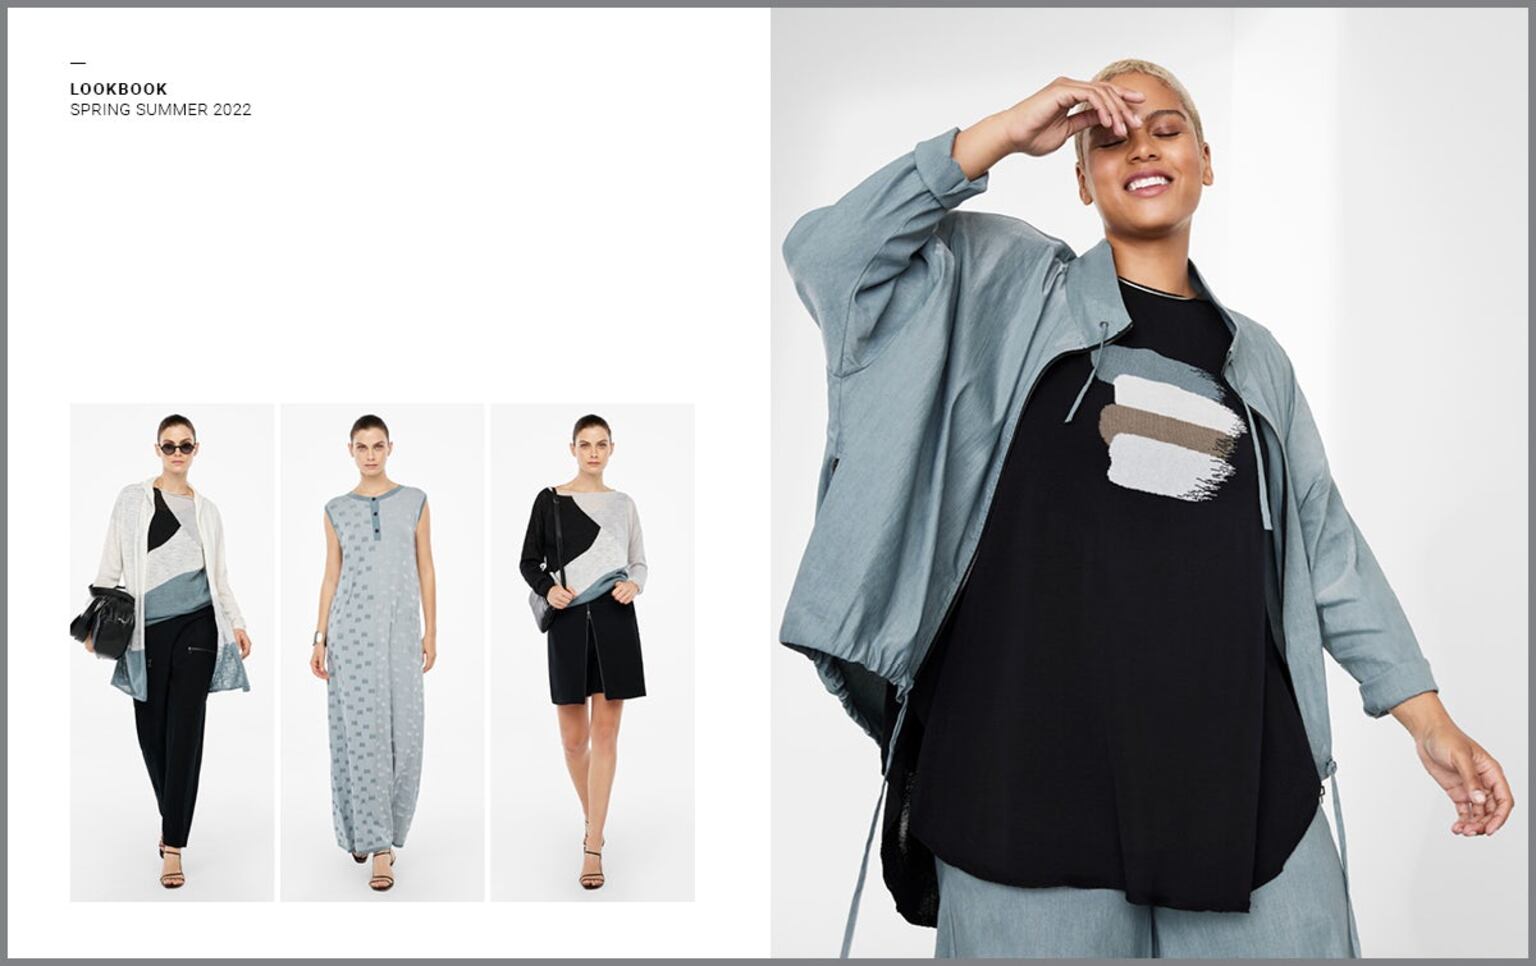 Sarah Pacini - My moments styles, for those chilly summer days